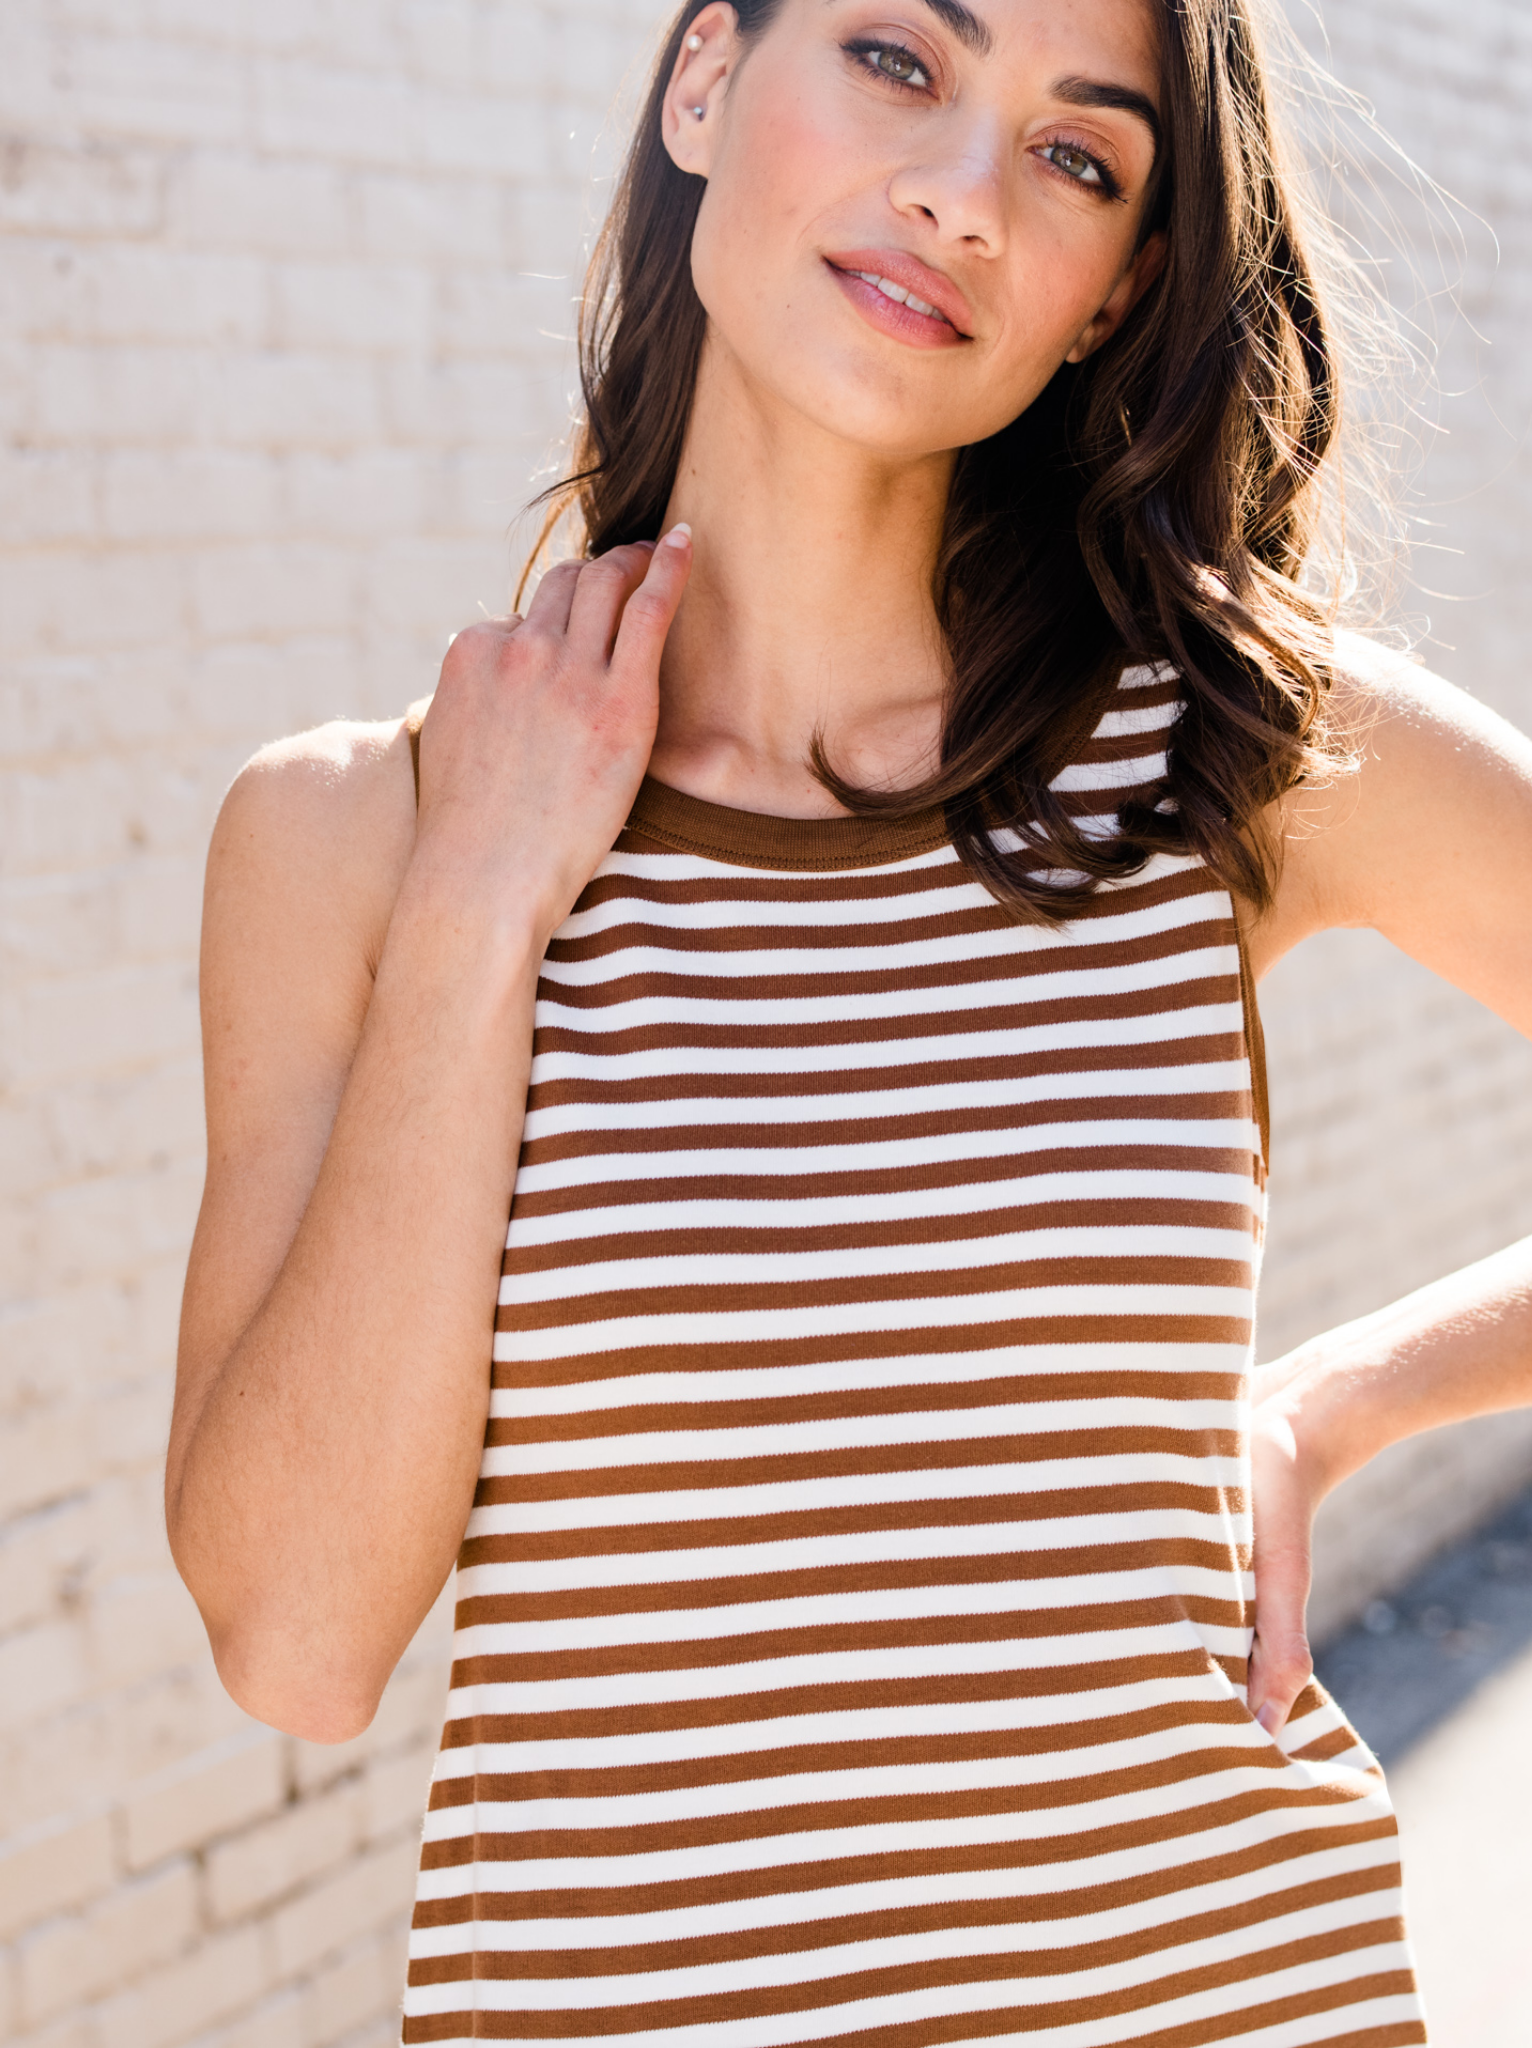 Woman in a striped dress standing against a white brick wall.